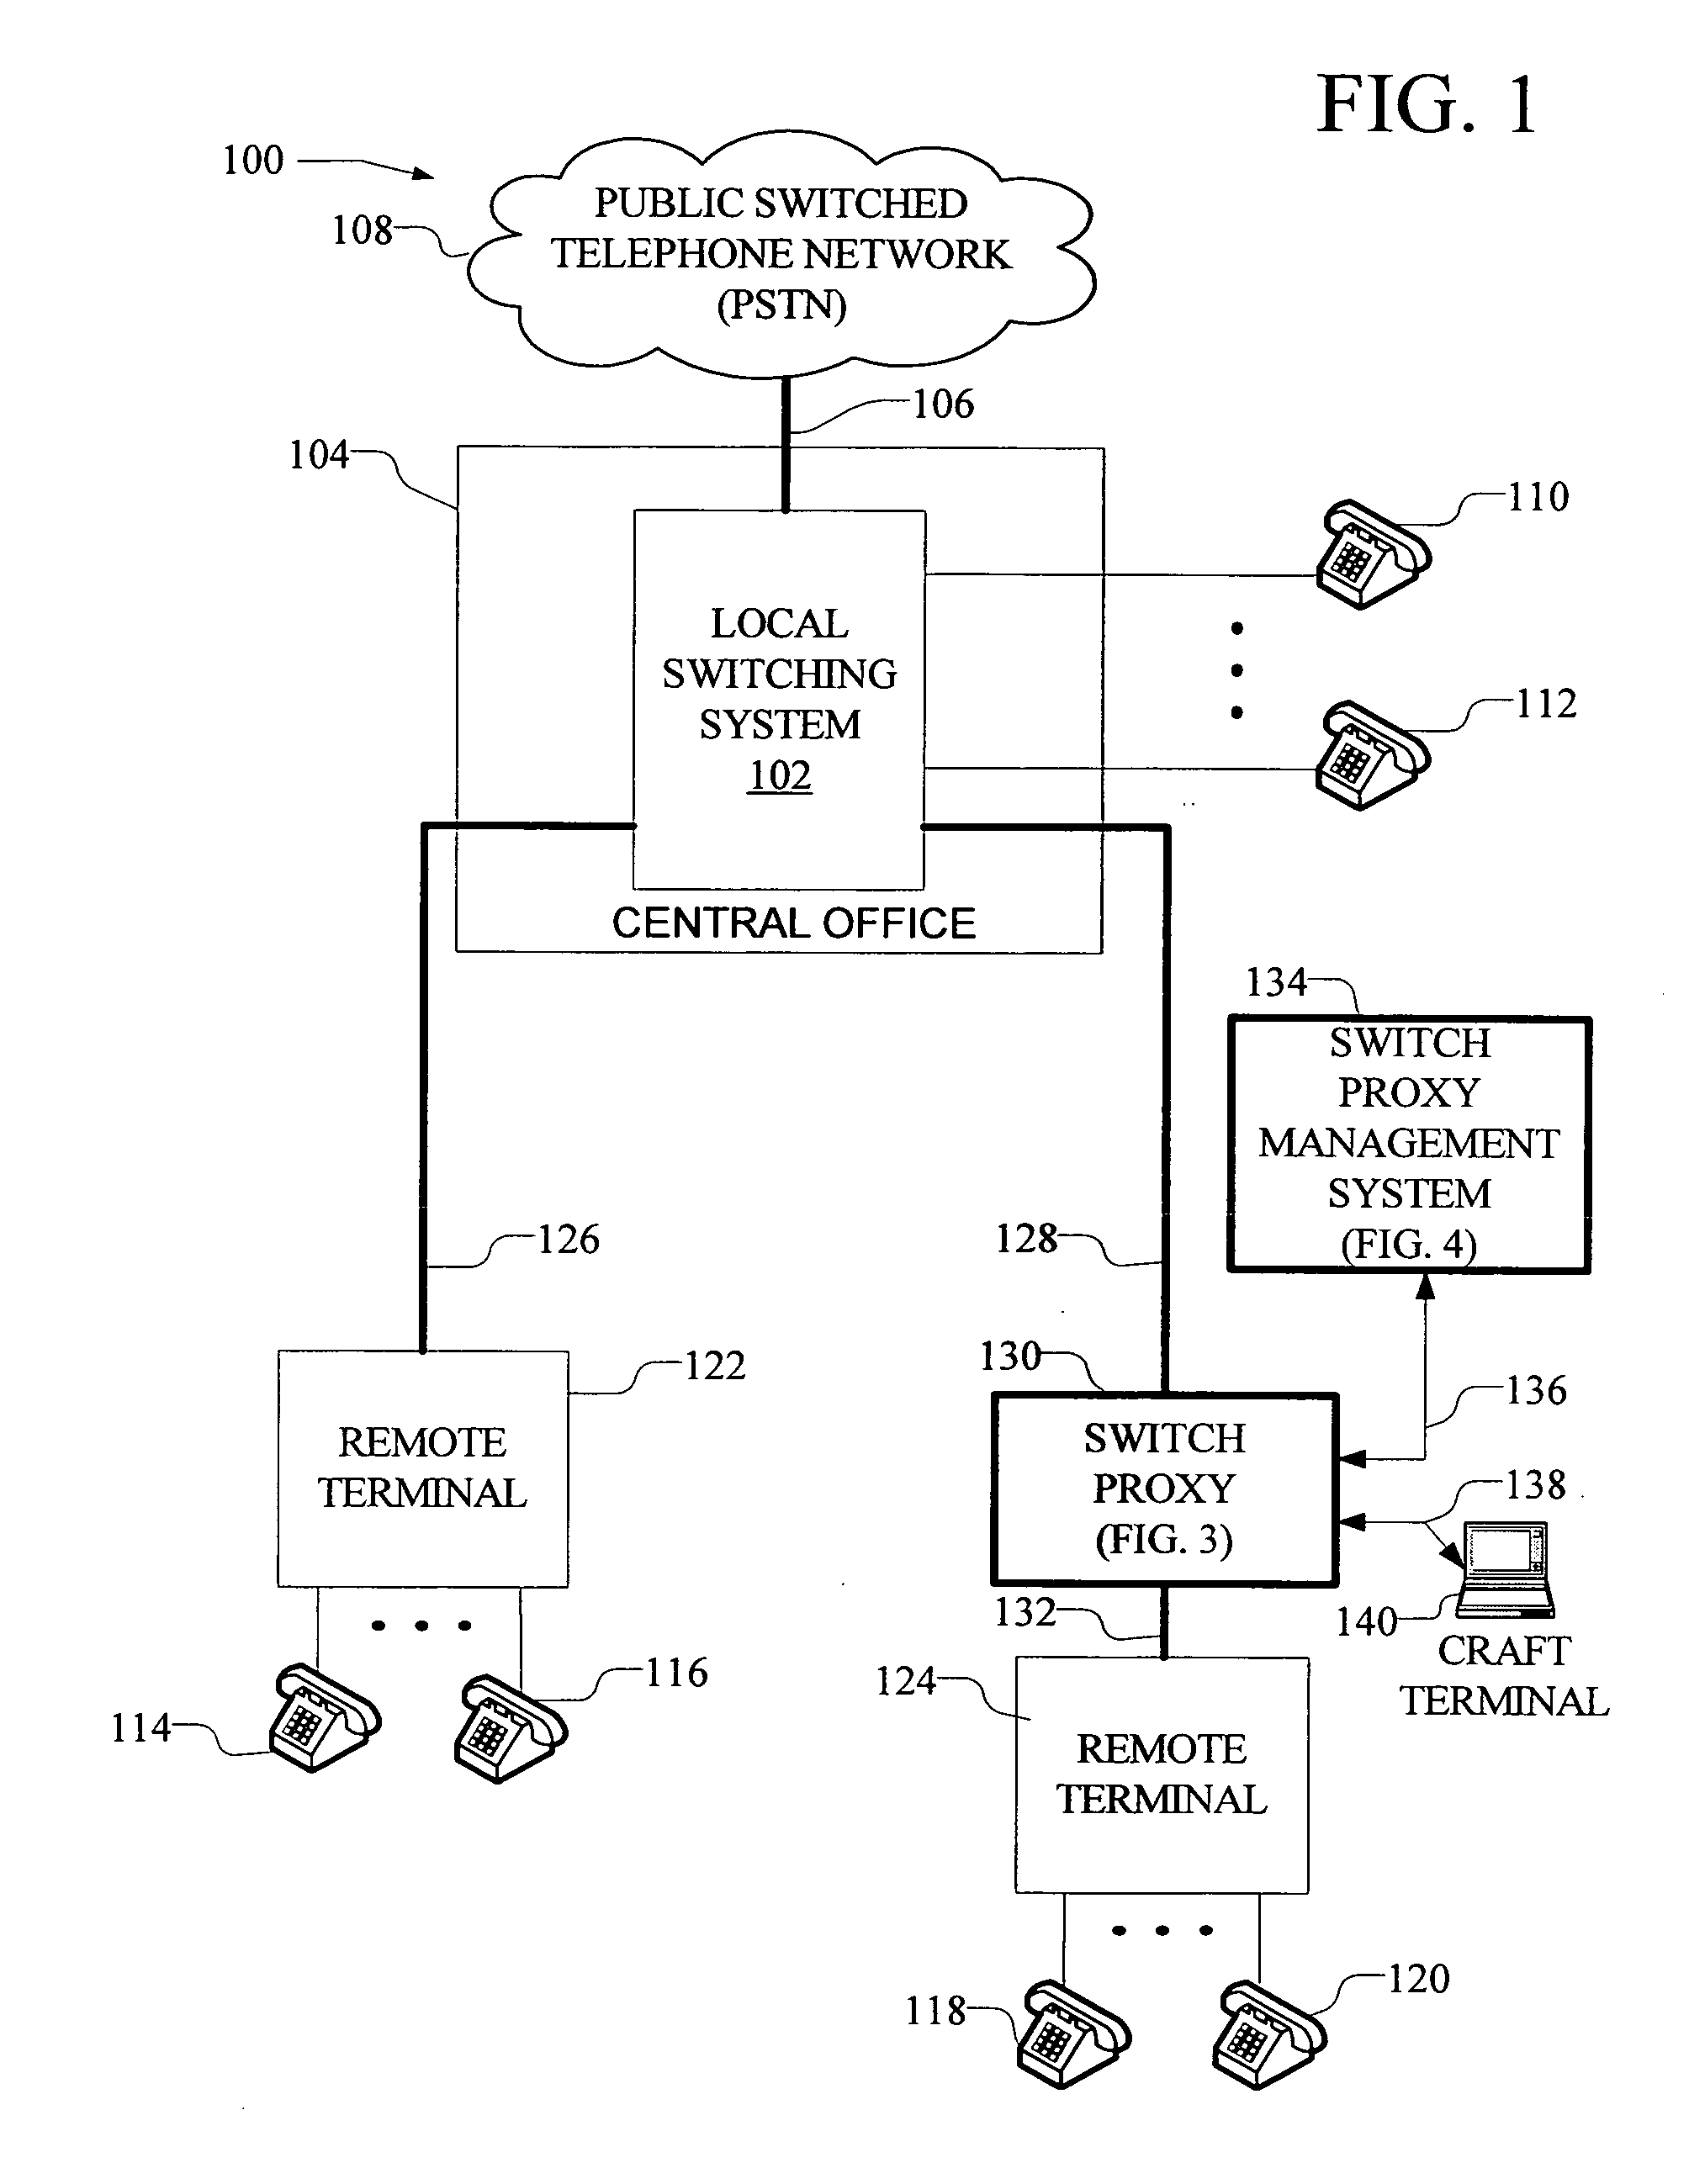 Switch proxy for providing emergency stand-alone service in remote access systems